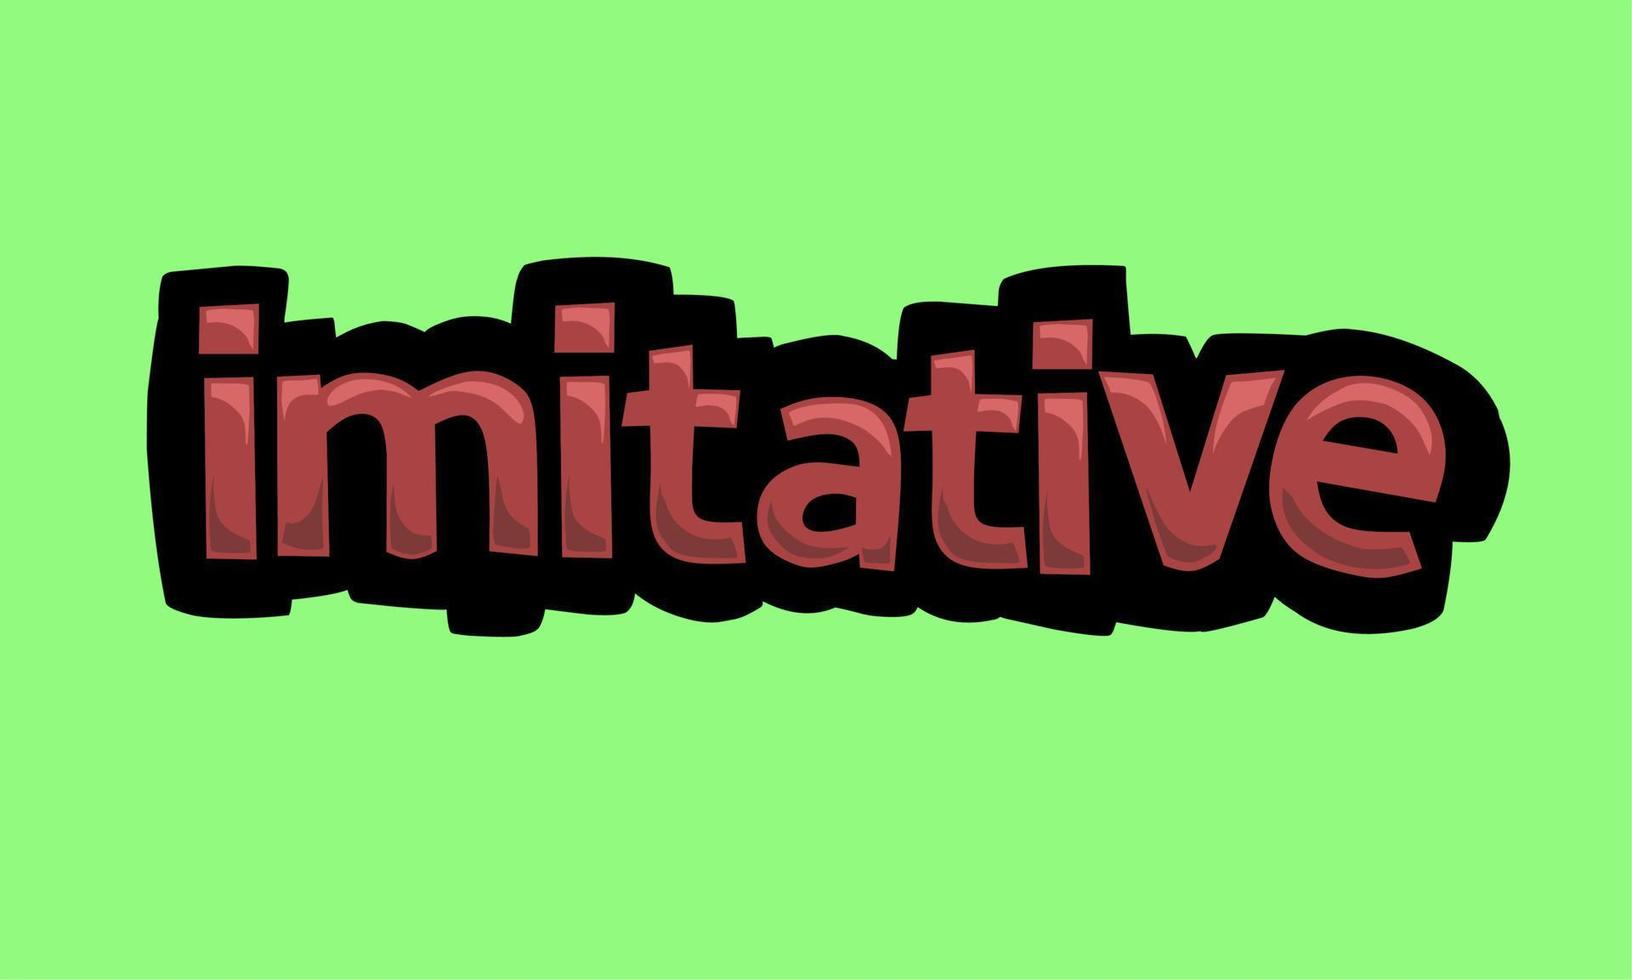 IMITATIVE writing vector design on a green background